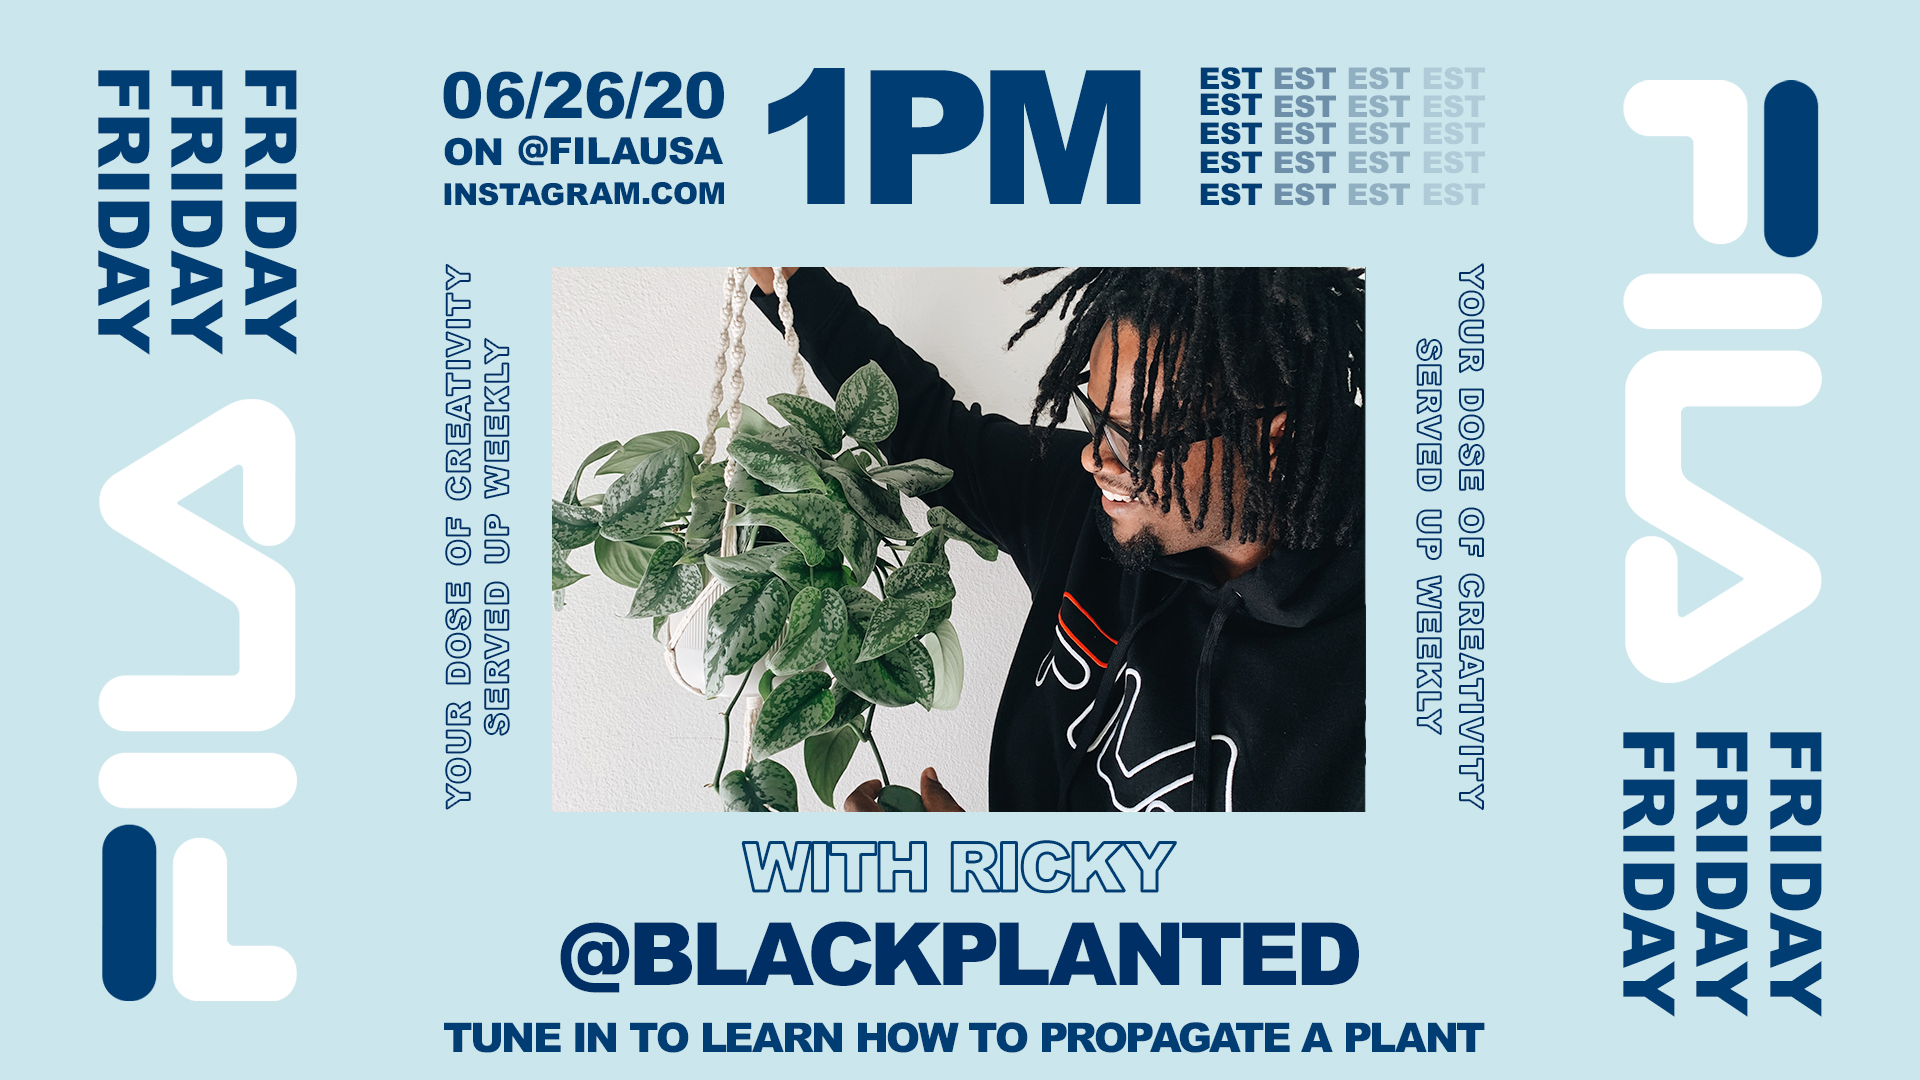 FILA on Twitter: "Introducing FILA Fridays. Tune in to our IG Live (@filausa) on 6/26 to learn how to propagate a with Ricky of @/blackplanted 🌱… https://t.co/beJtnECGBl"